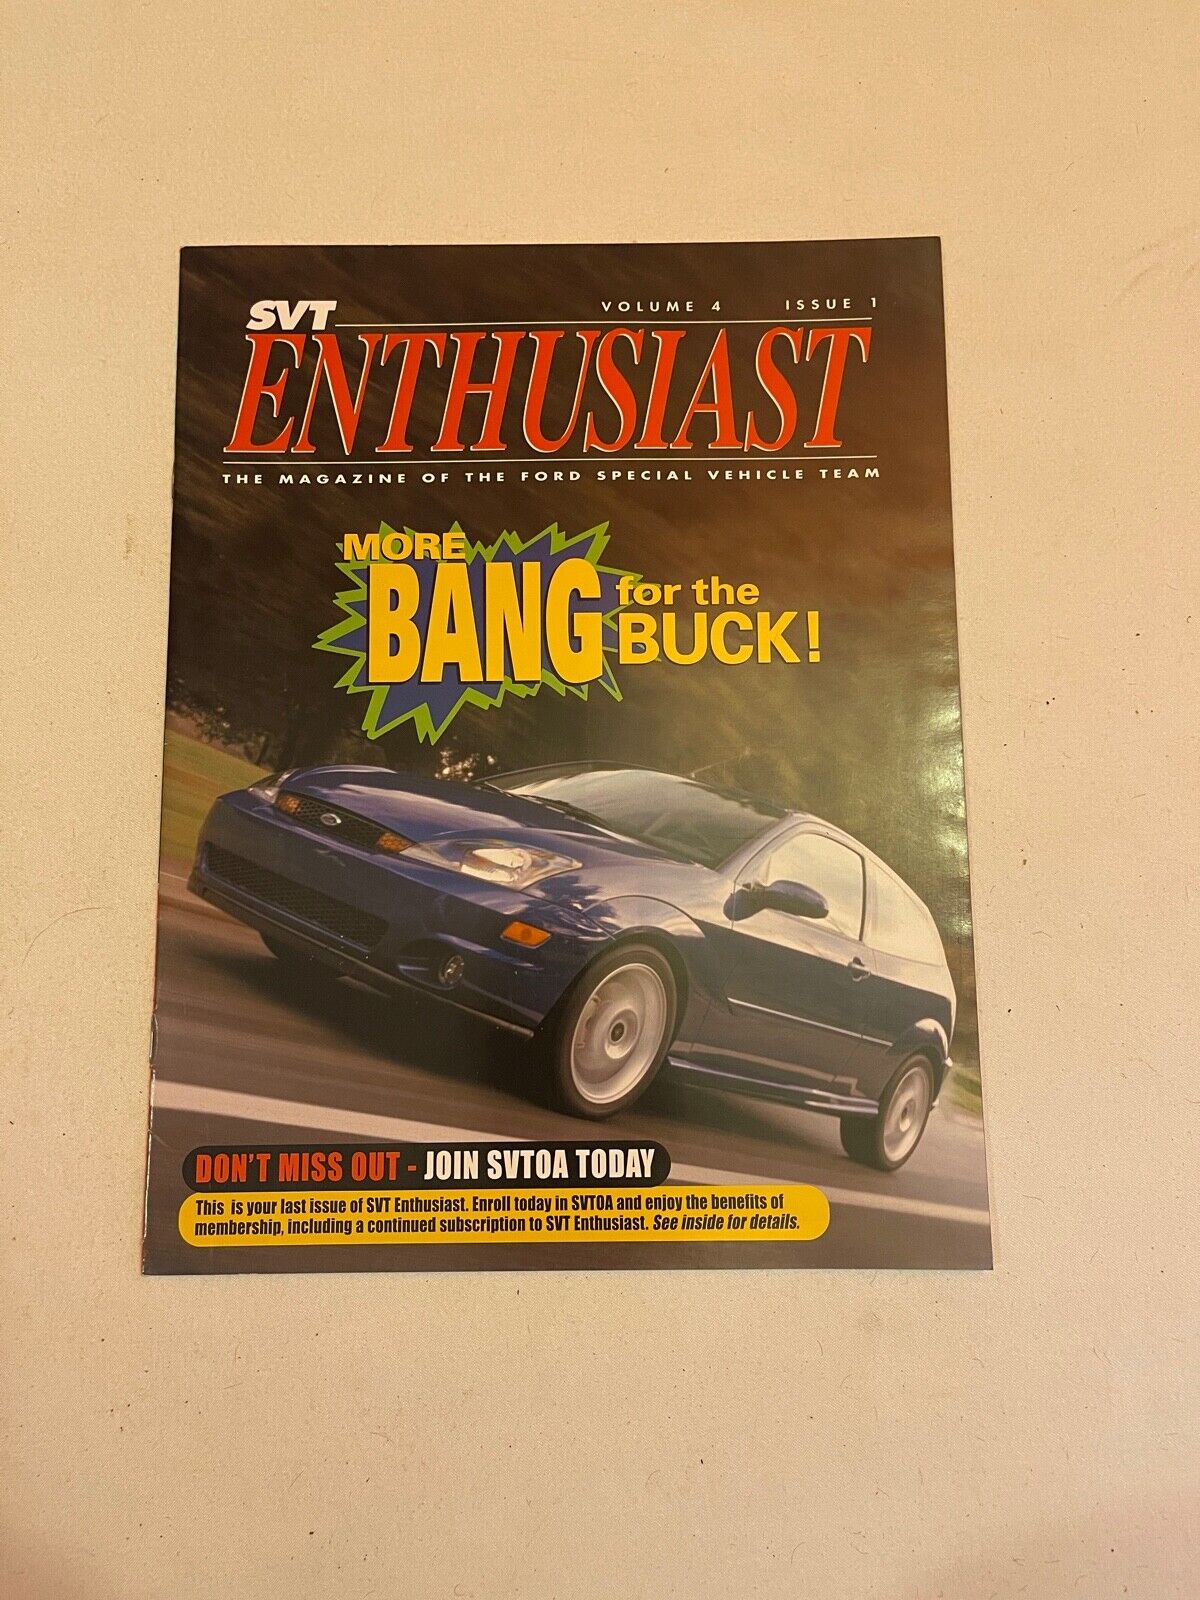 FORD SVT Focus Mustang Enthusiast Magazine USA brochure - Vol 4 Issue 1 2001